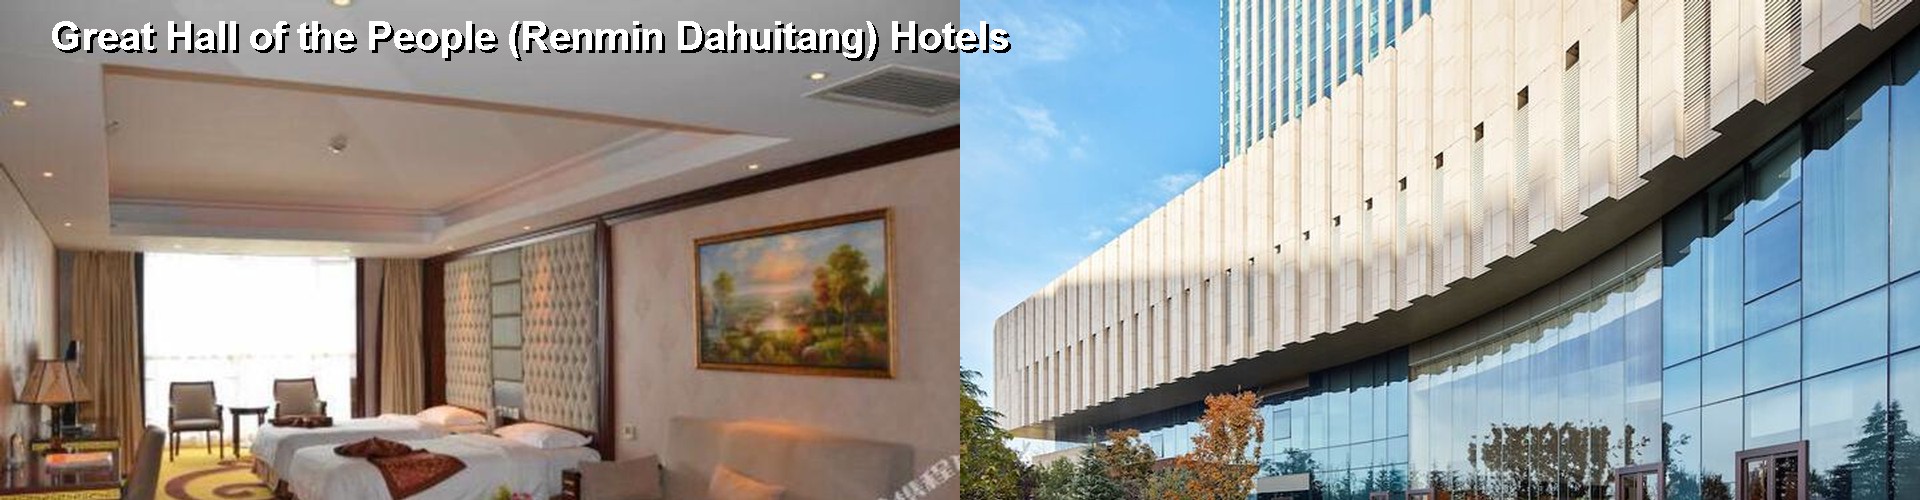 3 Best Hotels near Great Hall of the People (Renmin Dahuitang)